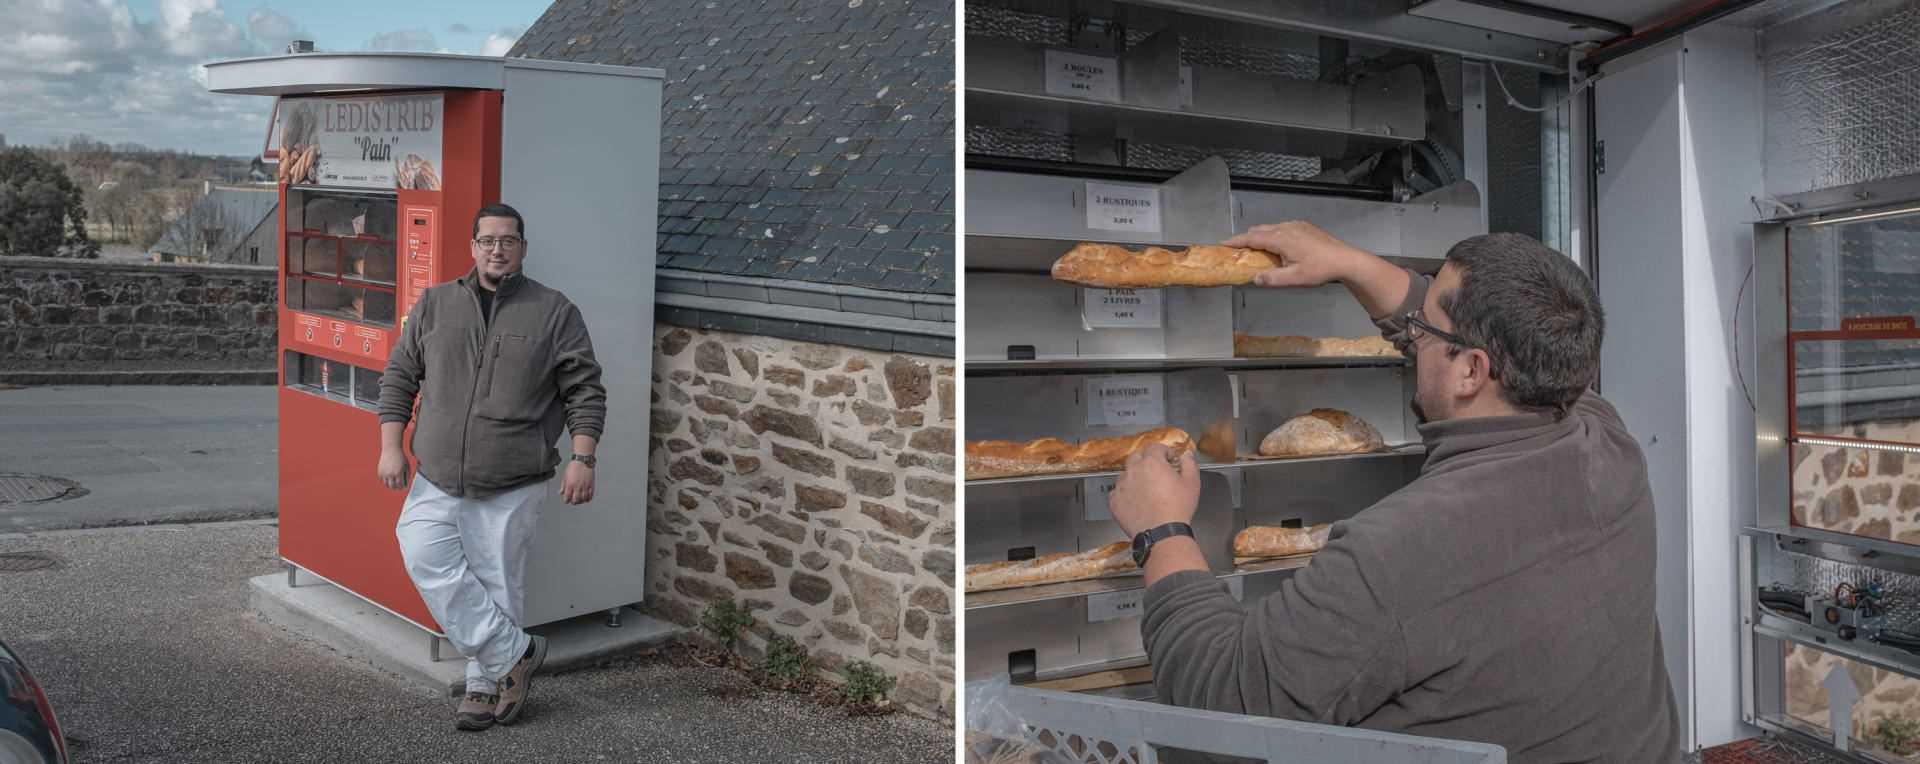 Boulander Nicolas Lattay recharges the automatic bread distributor in Mont-Dol.